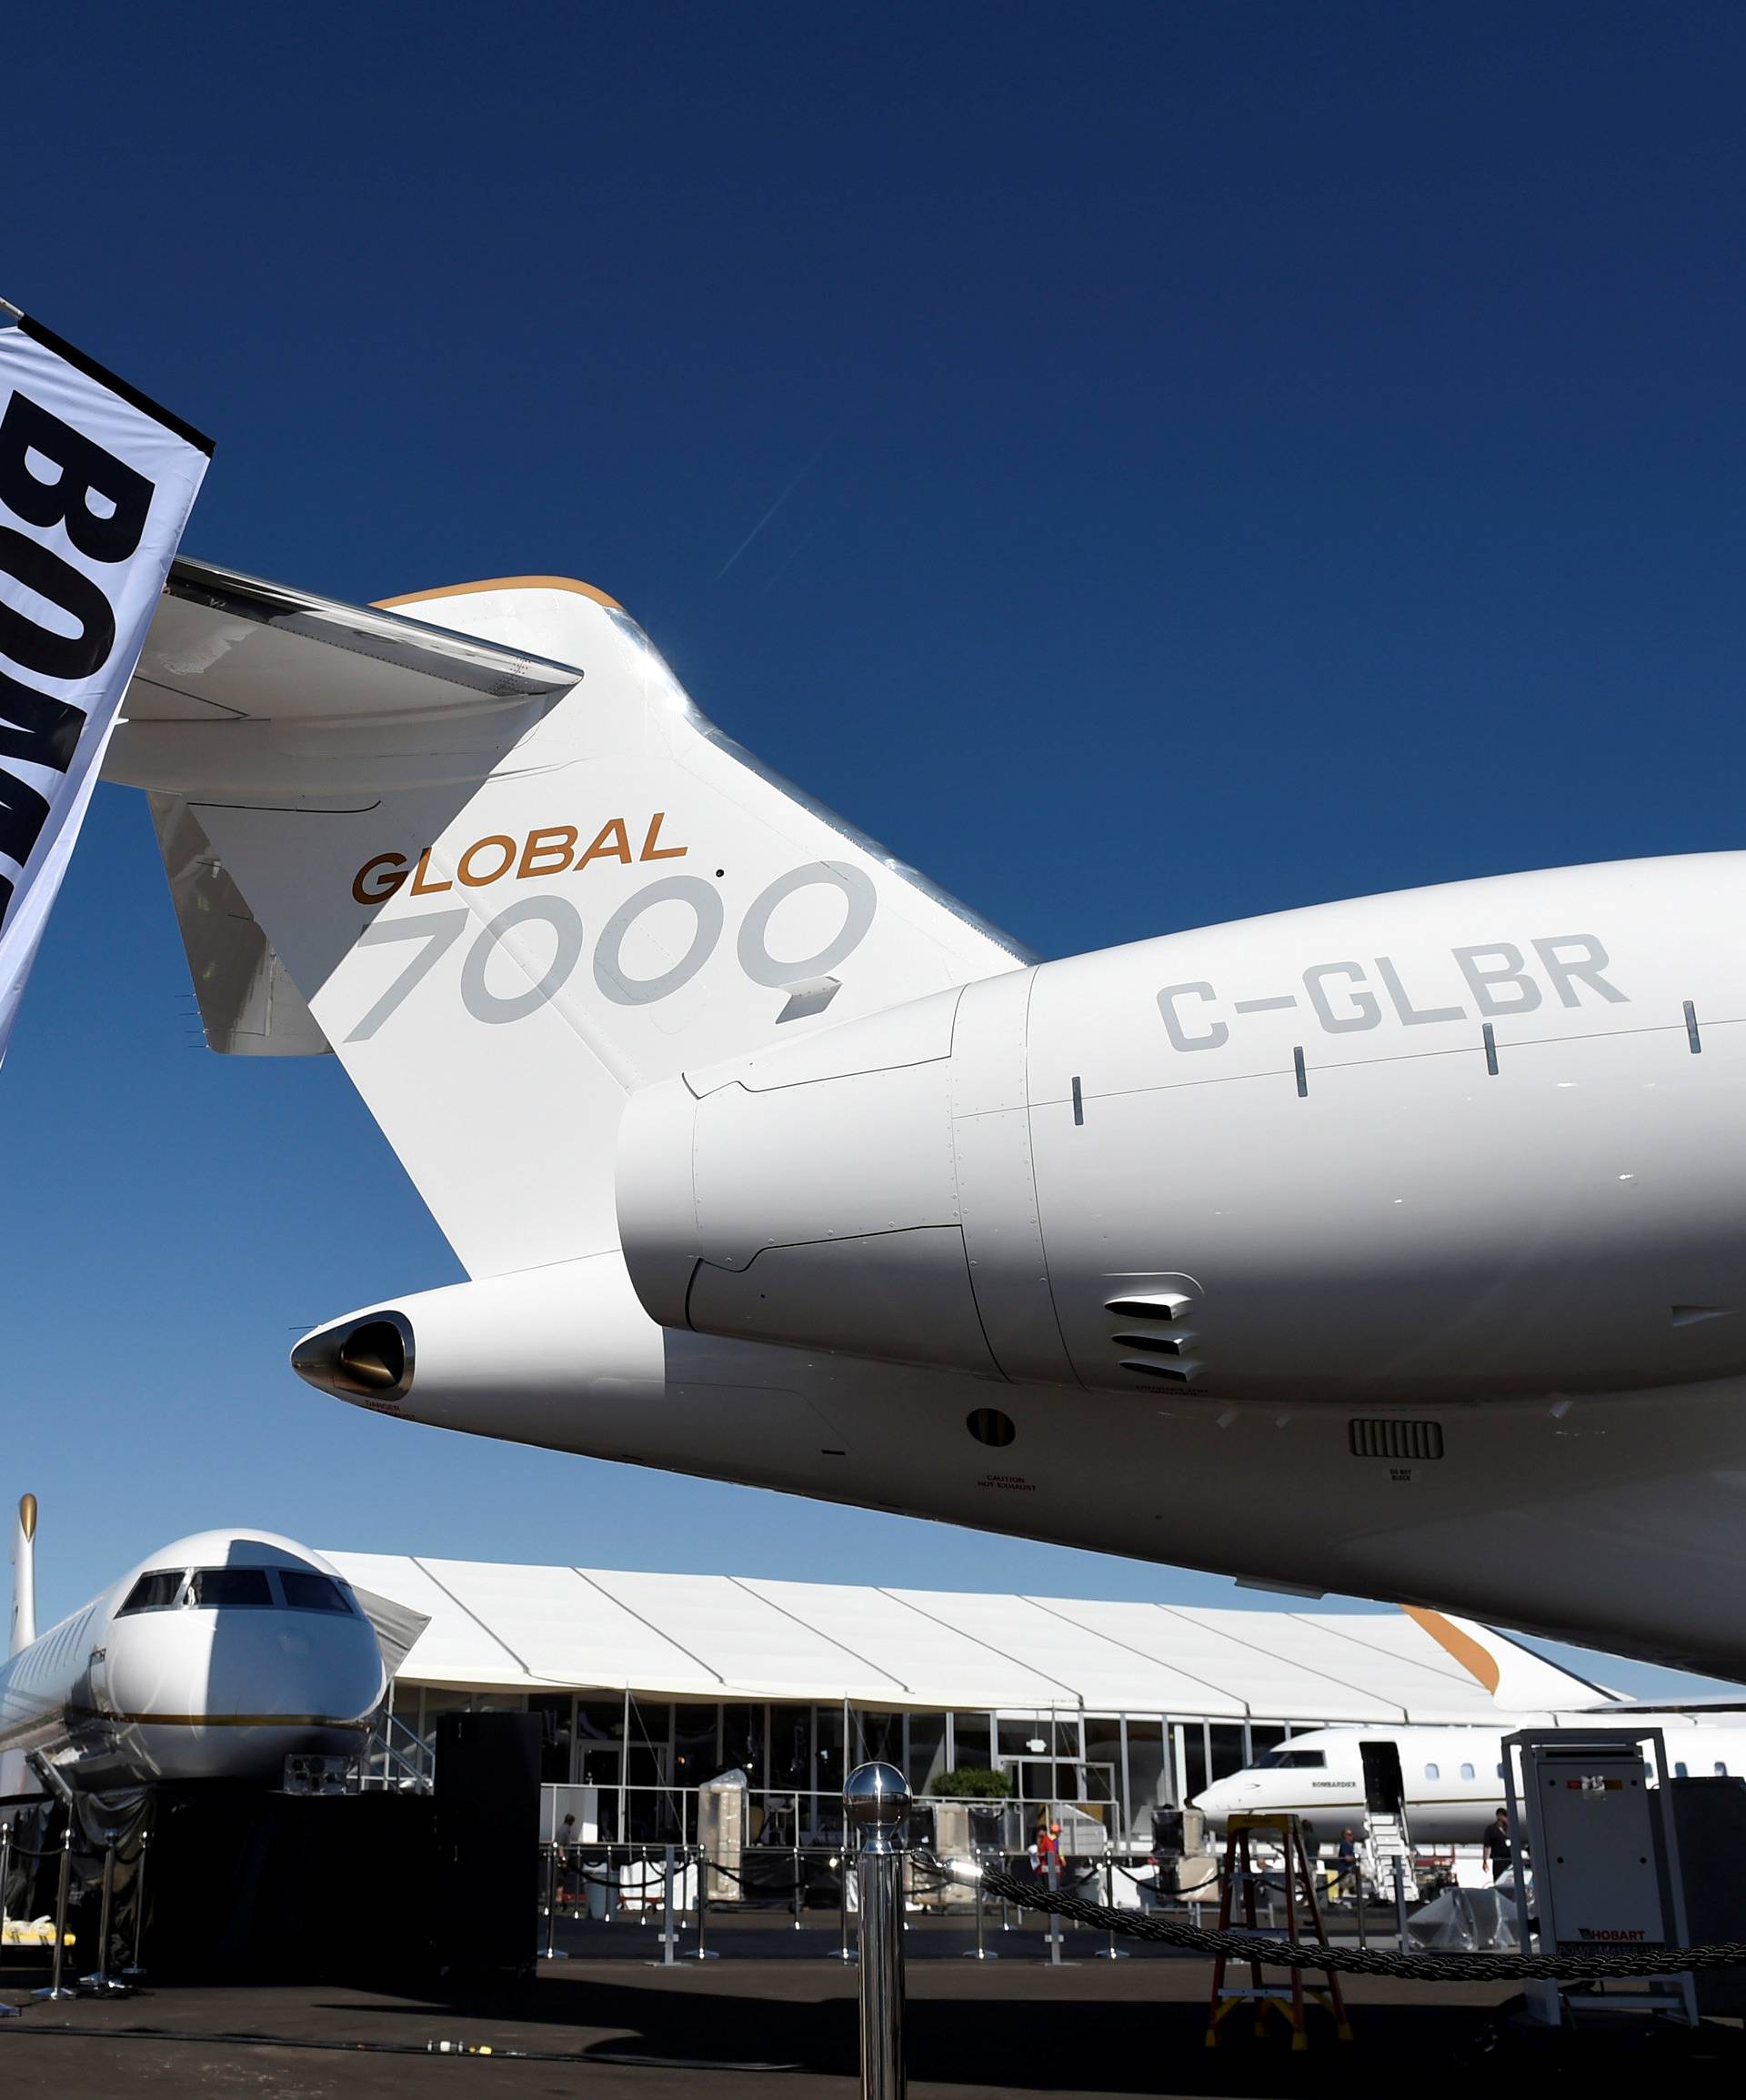 Bombardier's new Global 7000 business jet is seen during the National Business Aviation Association at the Henderson Executive Airport in Henderson